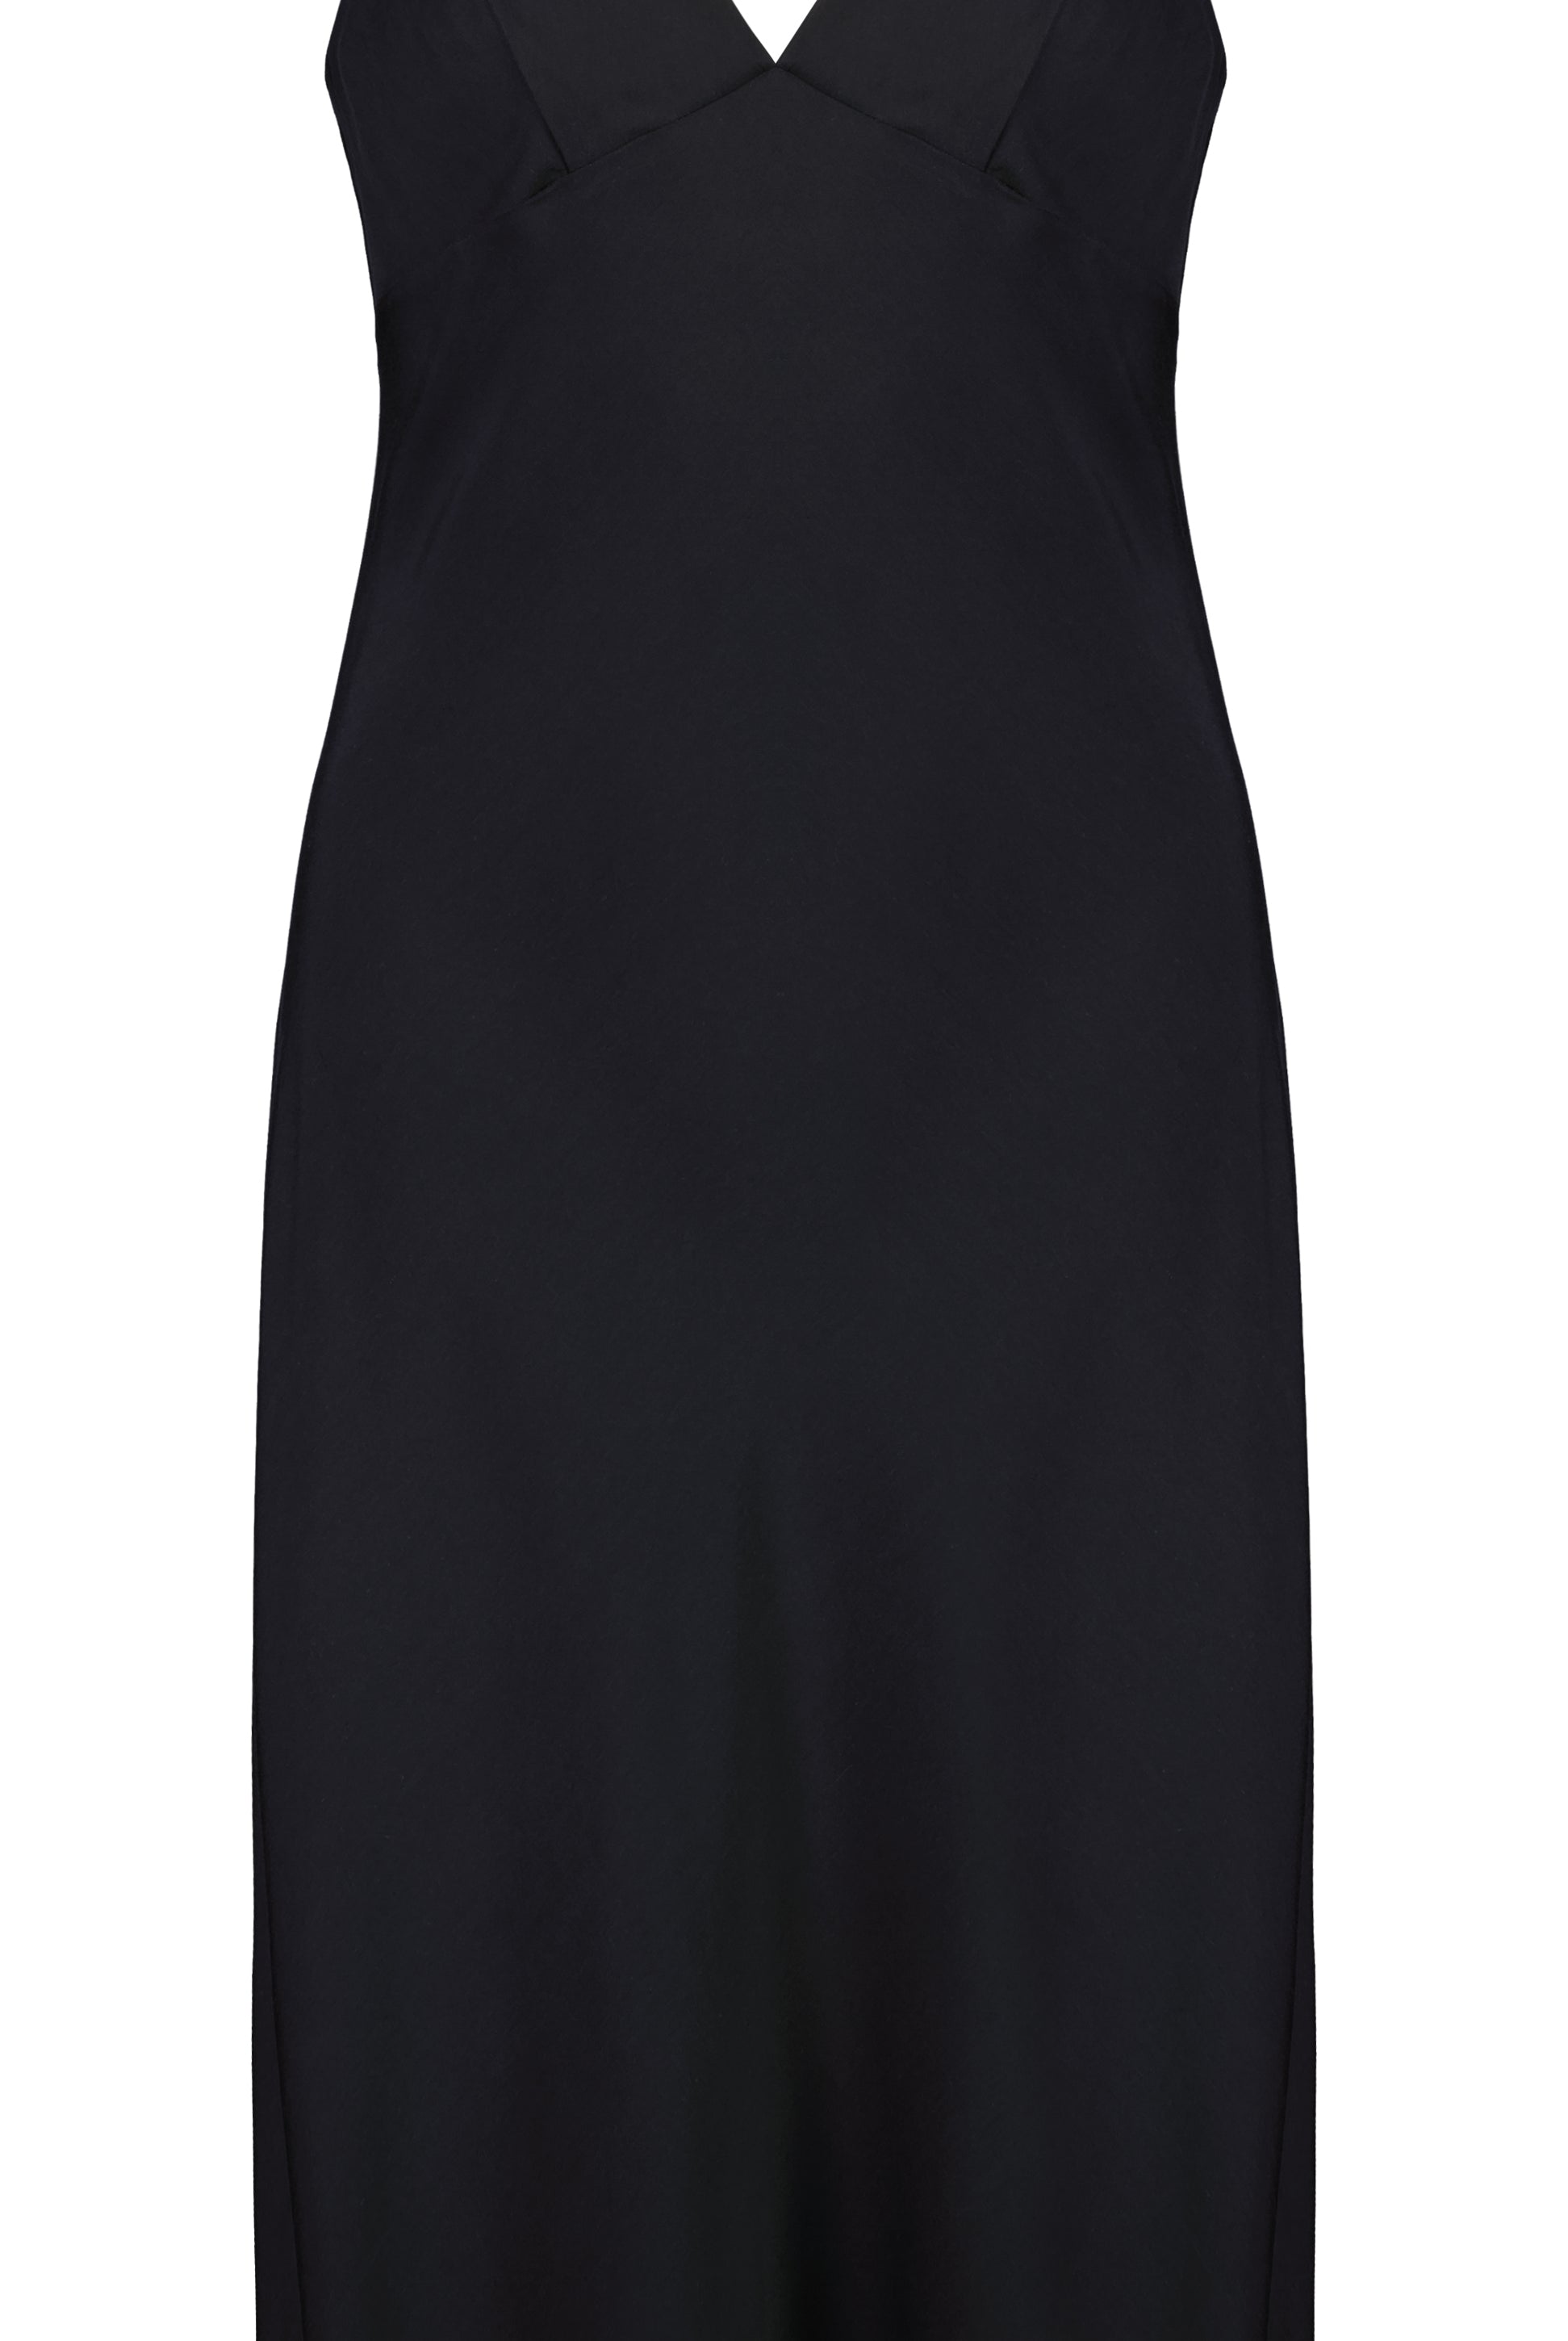 BY NATALIE Lady of the Night Dress - Black - By Natalie - [product type] - Magpie Style